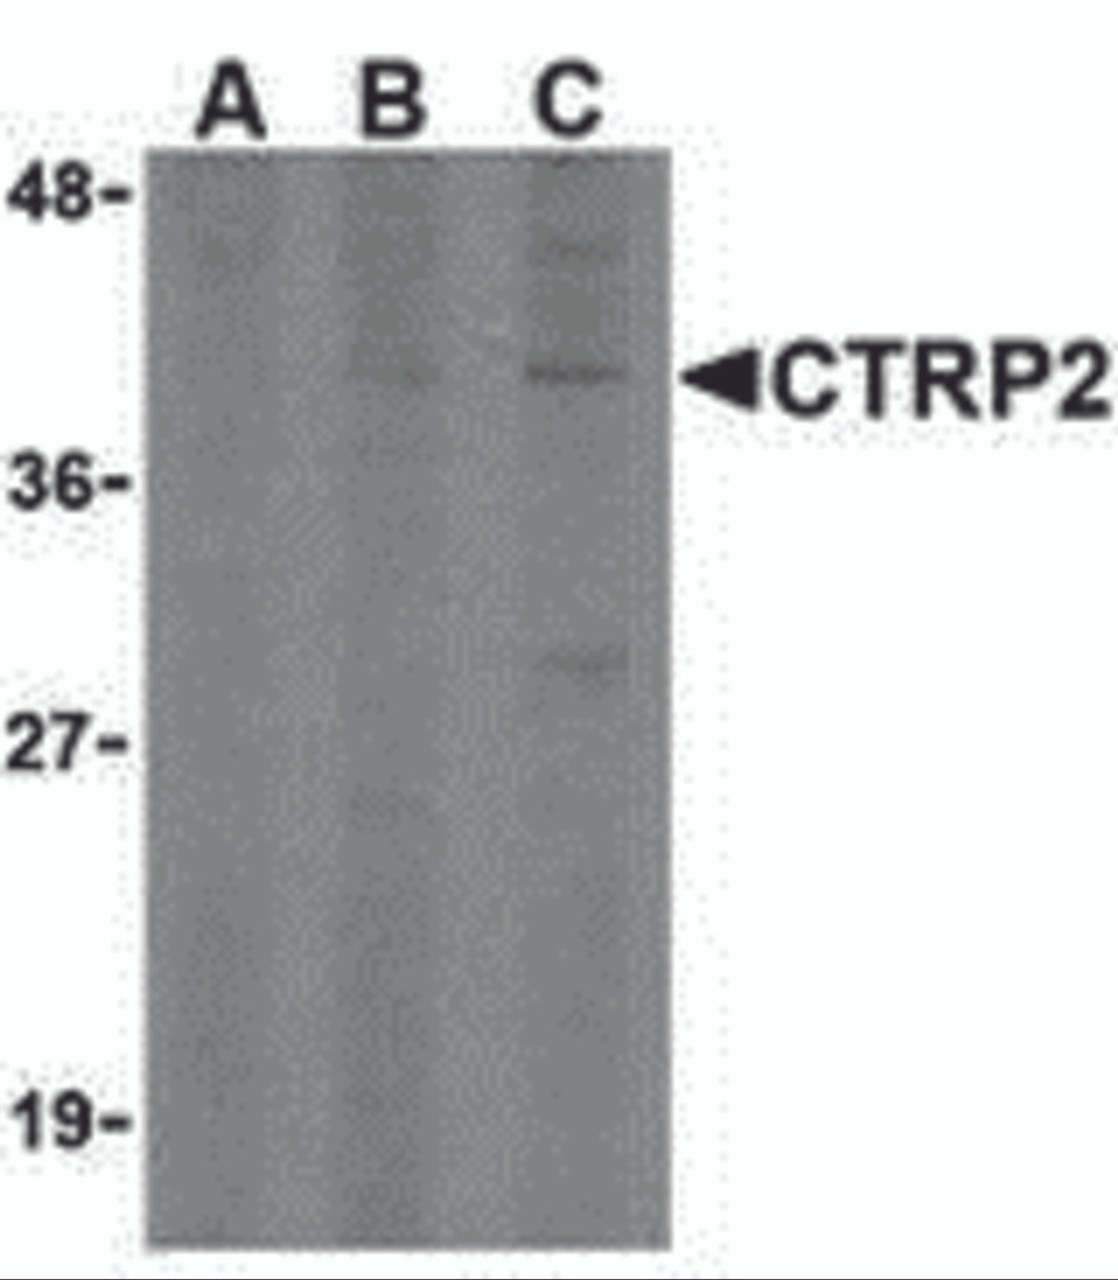 Western blot analysis of CTRP2 in 3T3 (Balb) cell lysate with CTRP2 (IN) antibody at (A) 1, (B) 2, and (C) 4 &#956;g/mL.